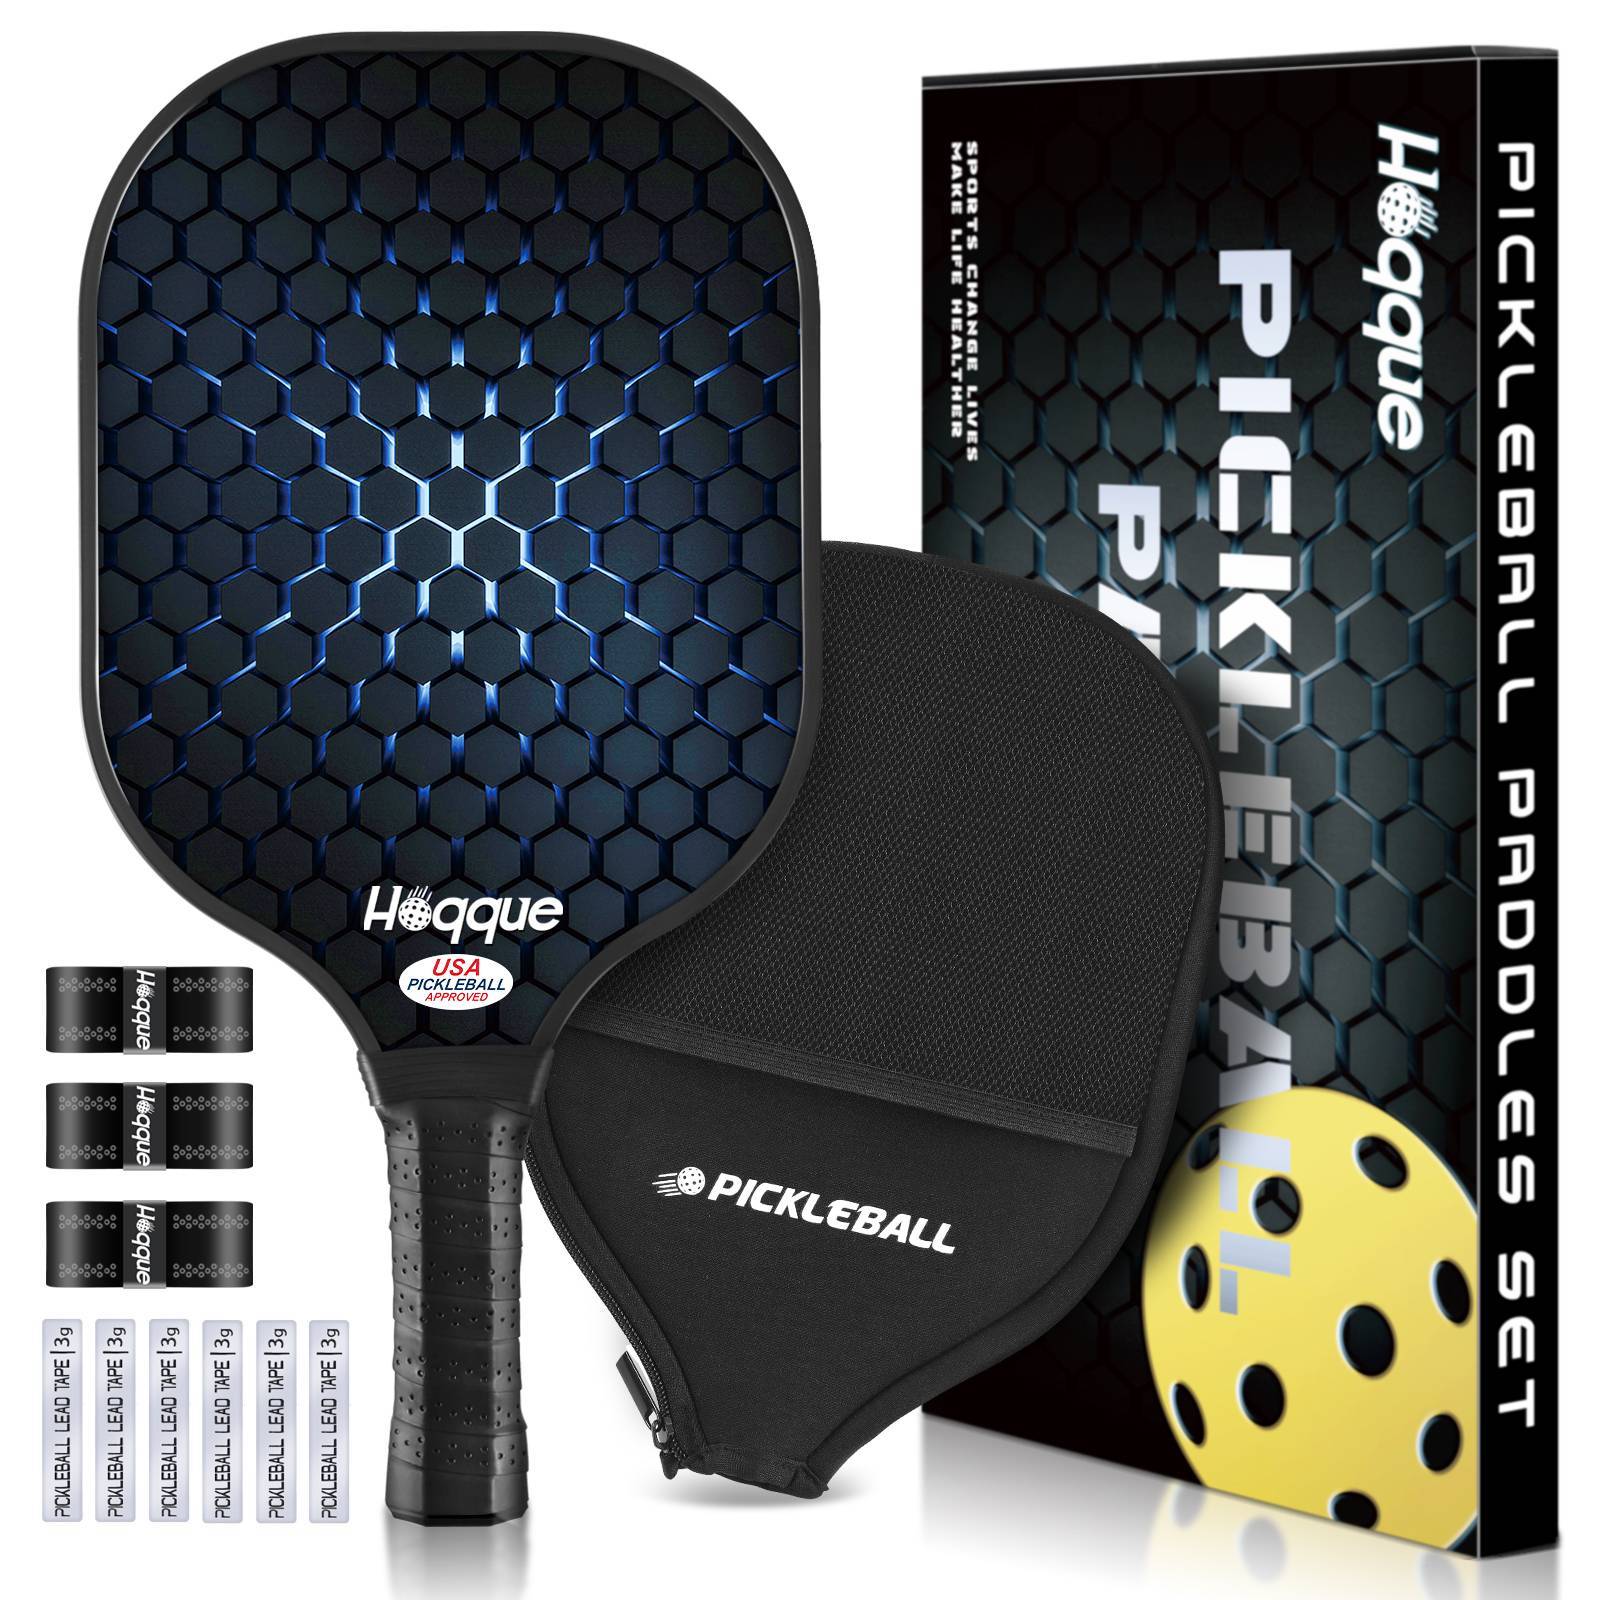 

Pickbleball Paddle With Protective Cover & Overgrips, Fiberglass Racket Grip Accessories Kit, Pickle Ball Paddles For Outdoor Training Sports